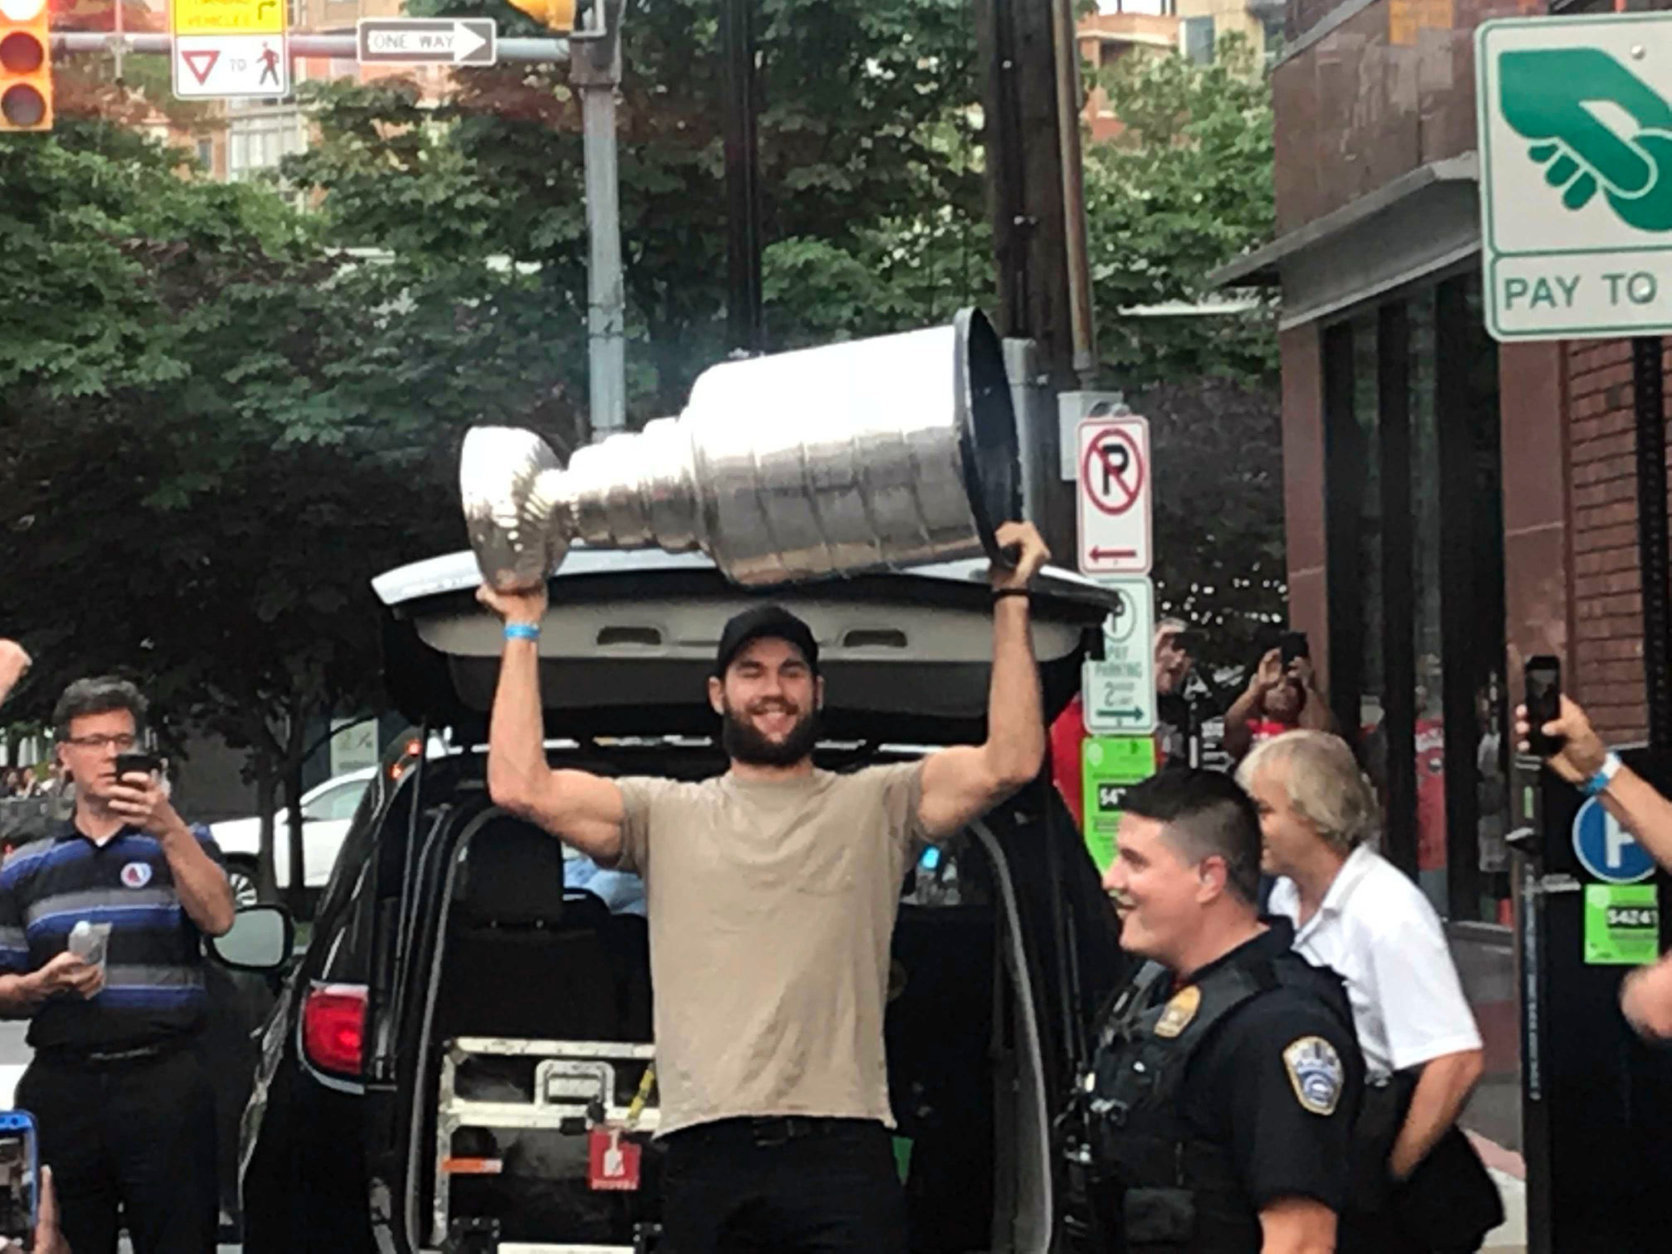 Tom Wilson hefts the Stanley Cup outside Don Tito in Clarendon. (WTOP/Chris Cichon)